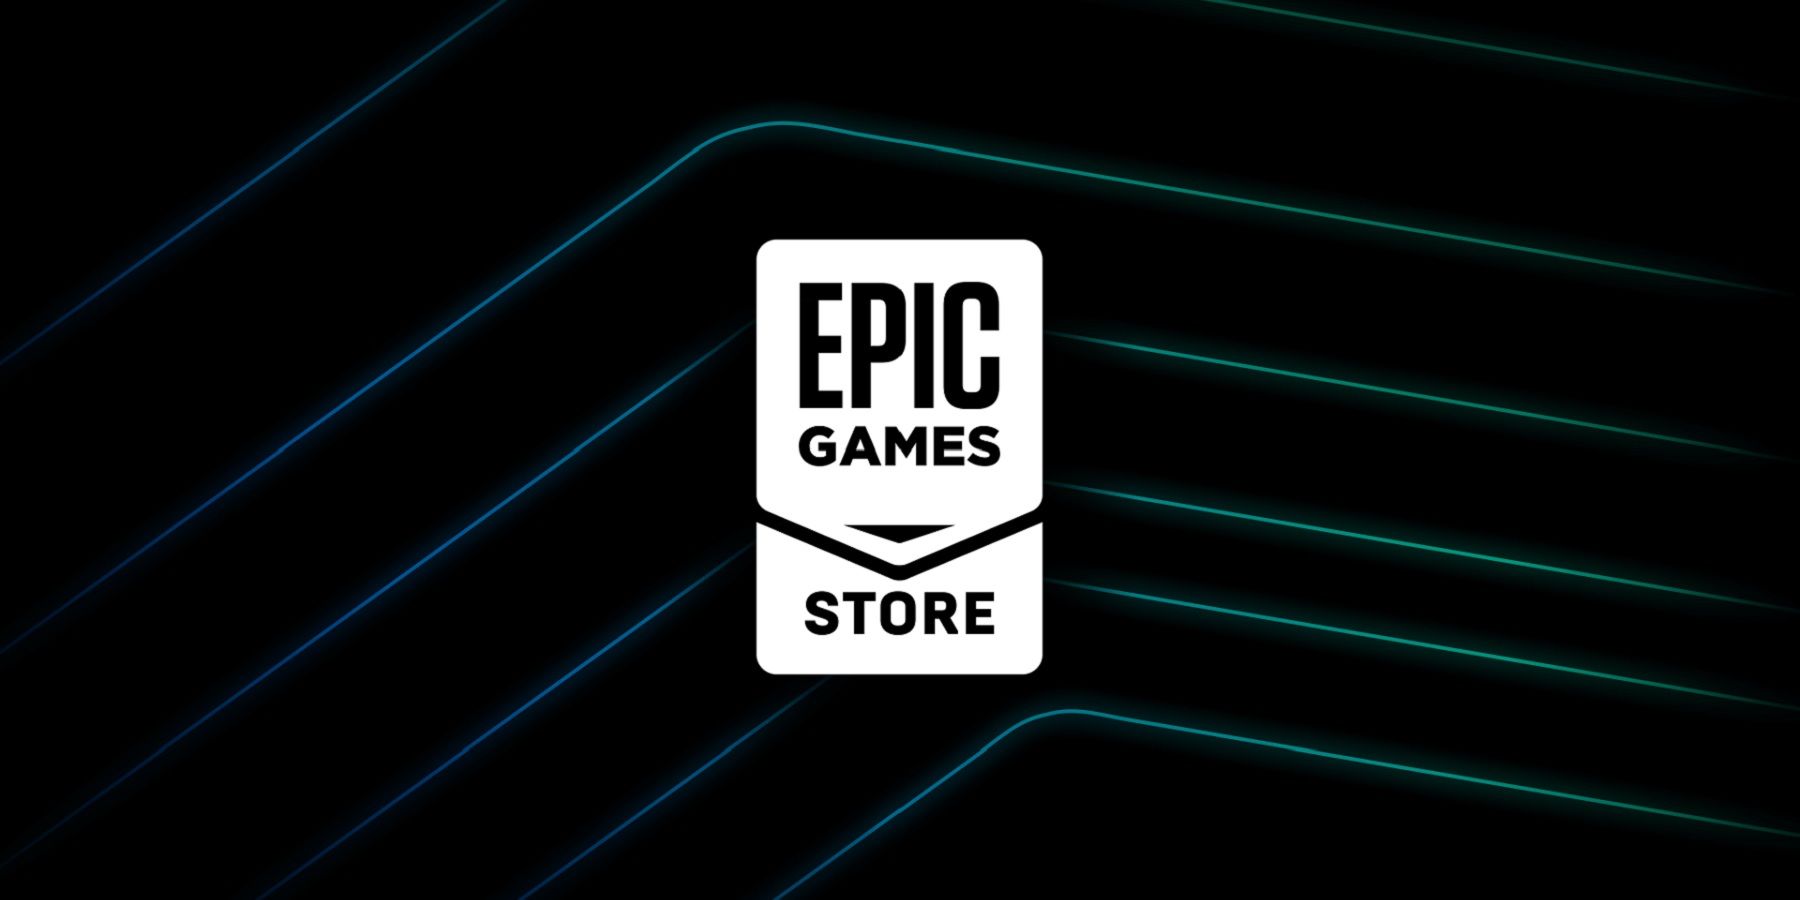 epic games store logo with lines